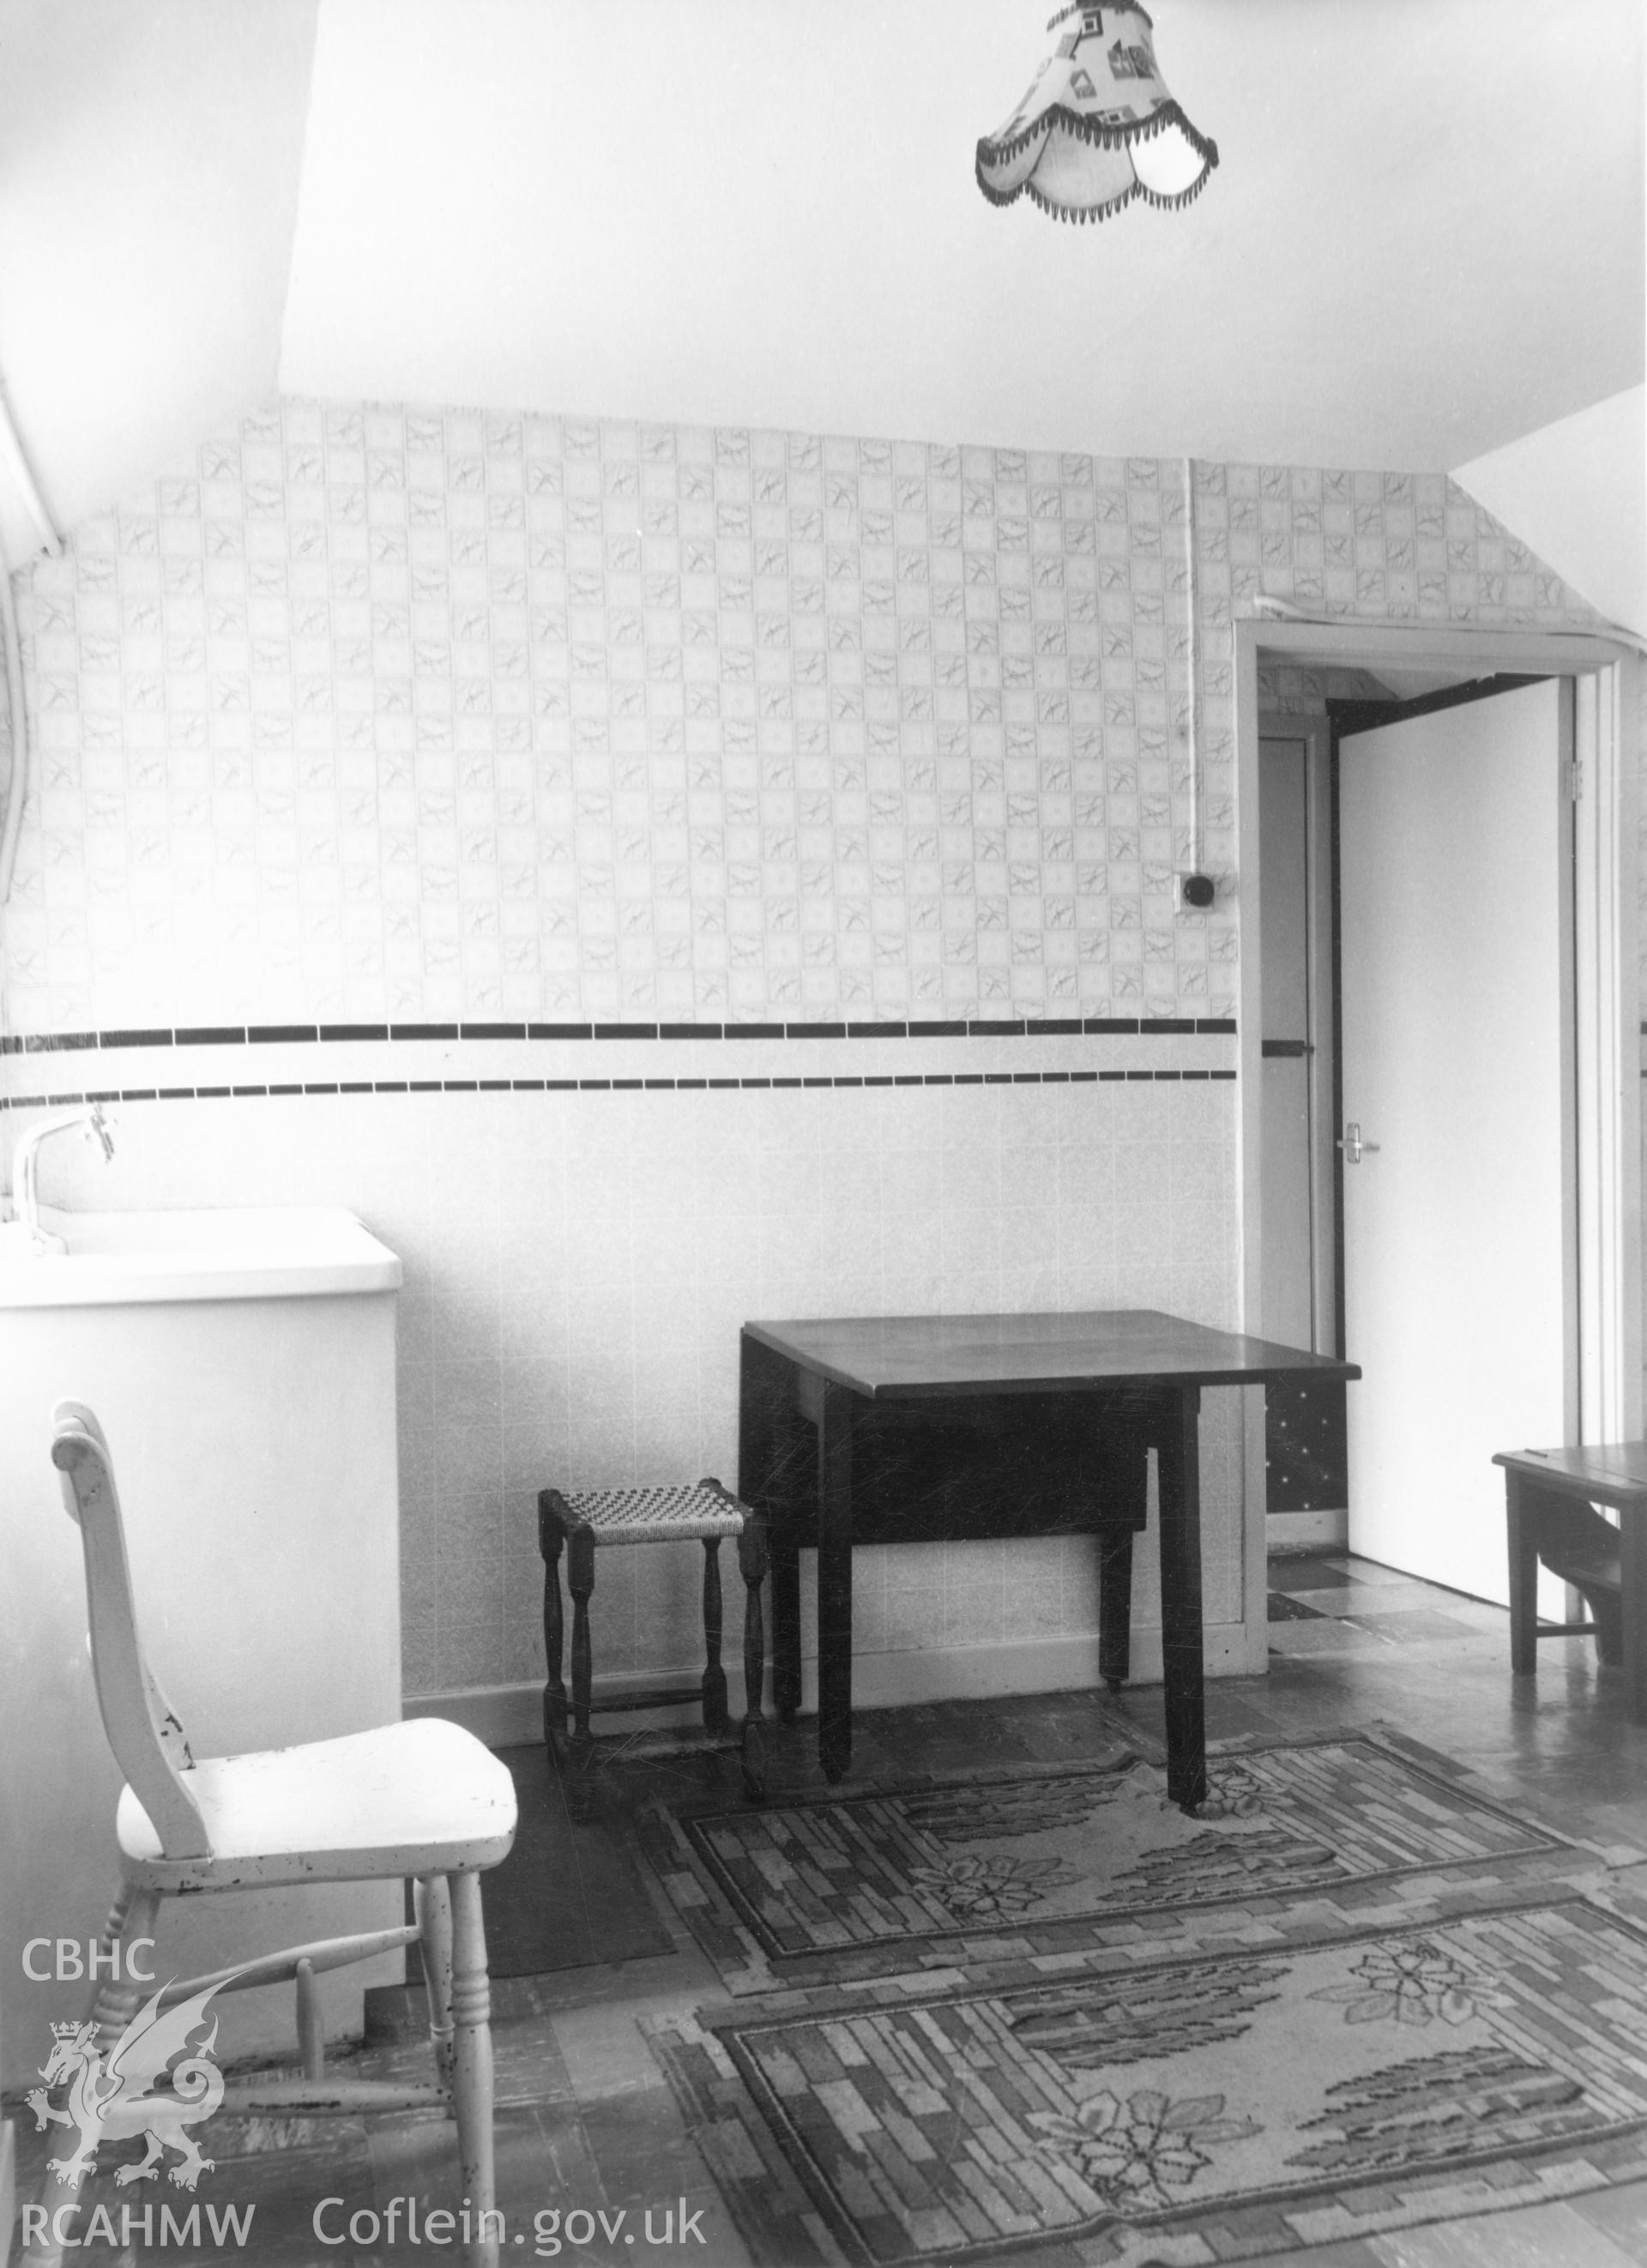 1 b/w print showing interior of 2 Rose Villas, Oaklands, Builth Wells (showing new sink unit), used as an illustration of the Housing Improvement Grant scheme for exhibitions held at Ministry of Housing stands at agricultural shows (1960); collated by the former Central Office of Information.